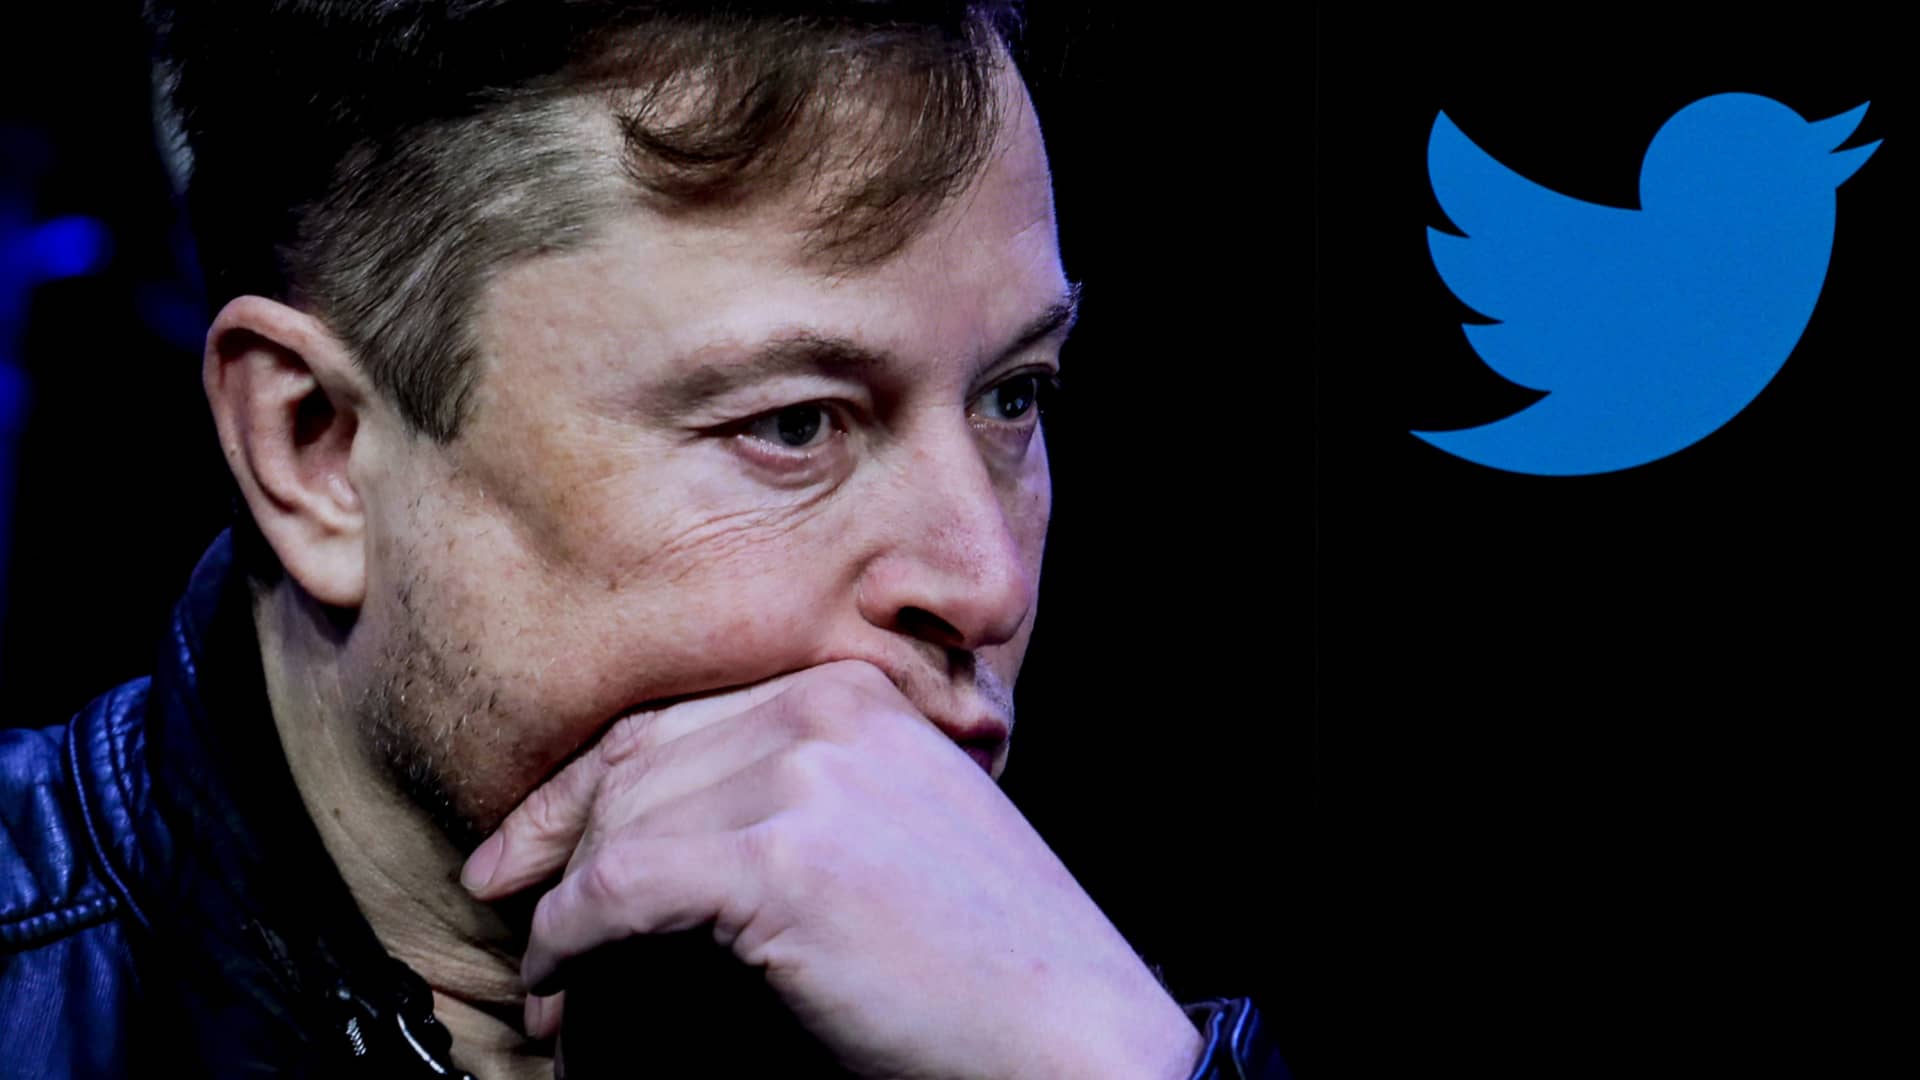 Here’s how Elon Musk can prevent racist raids on Twitter